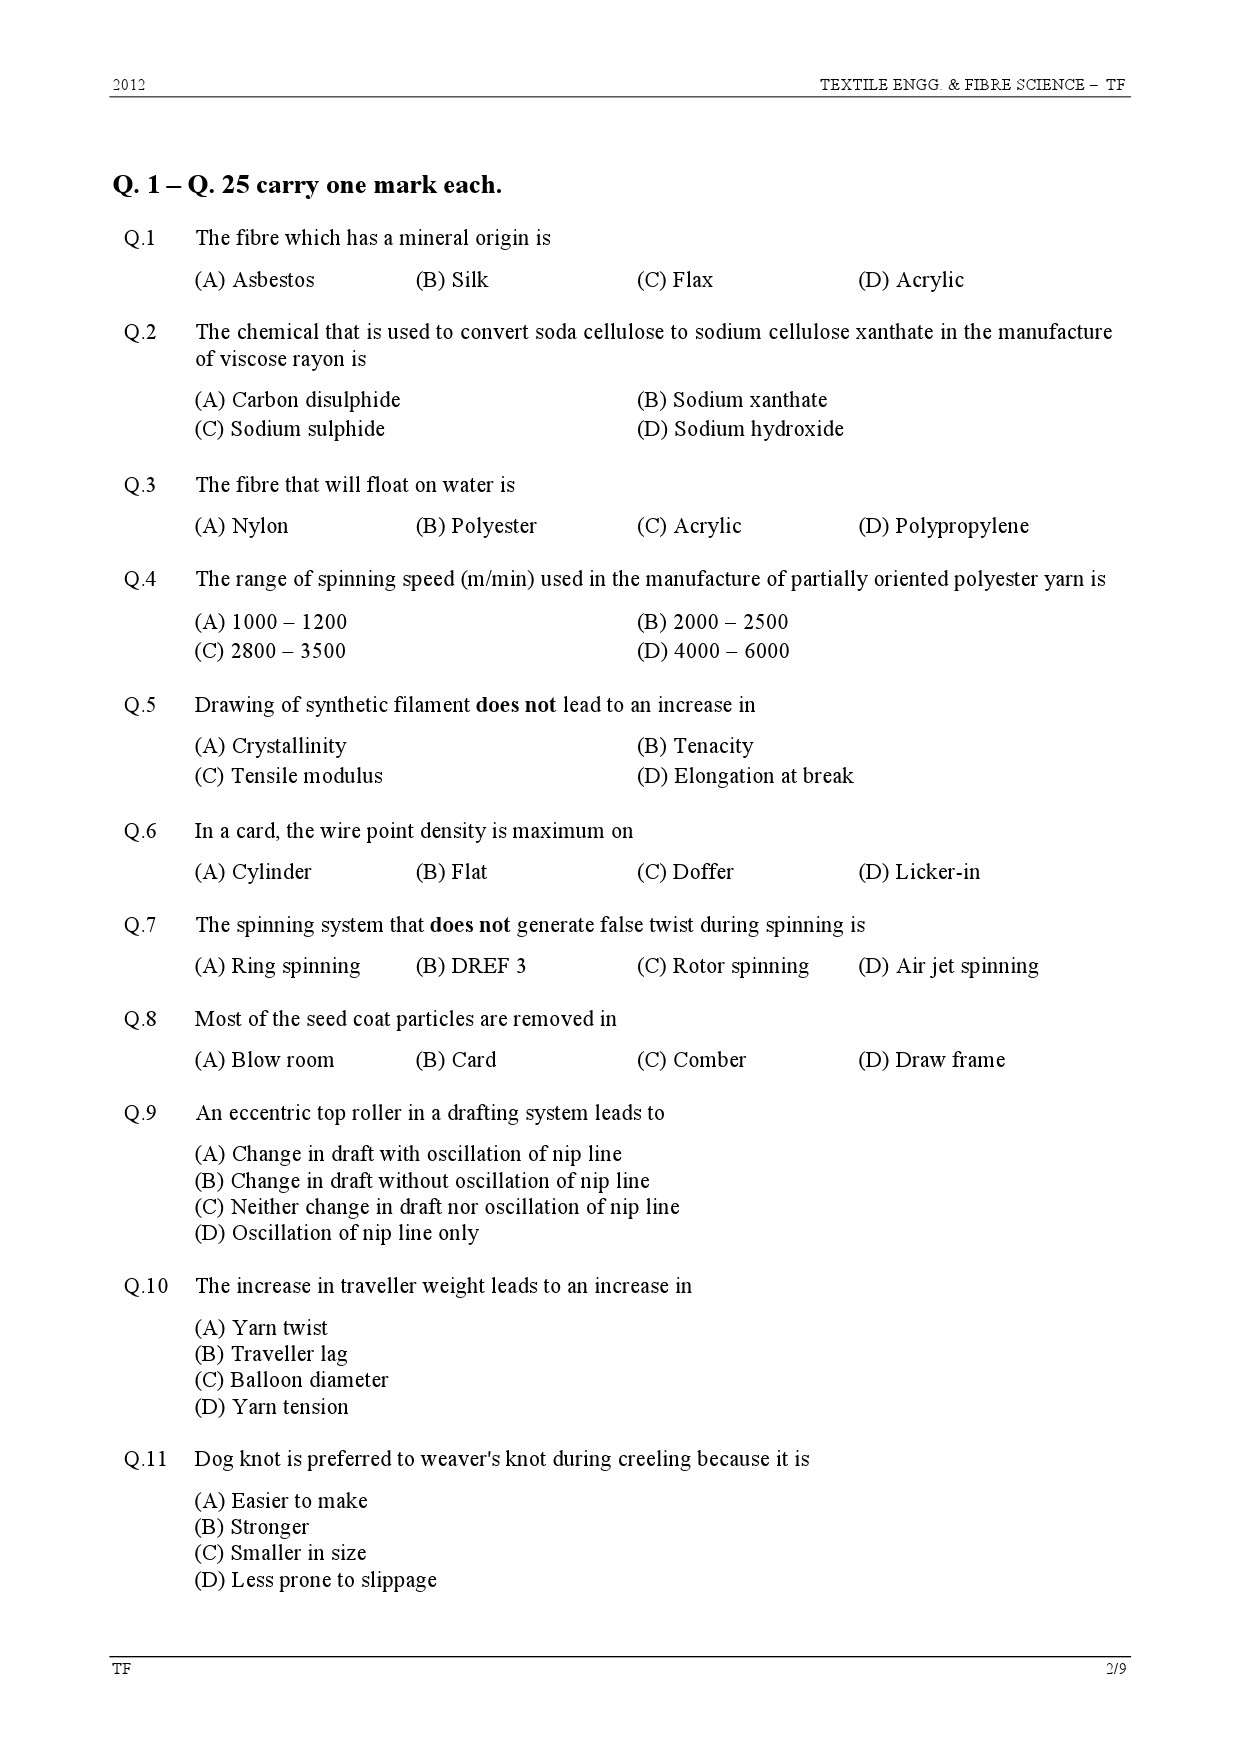 GATE Exam Question Paper 2012 Textile Engineering and Fibre Science 2